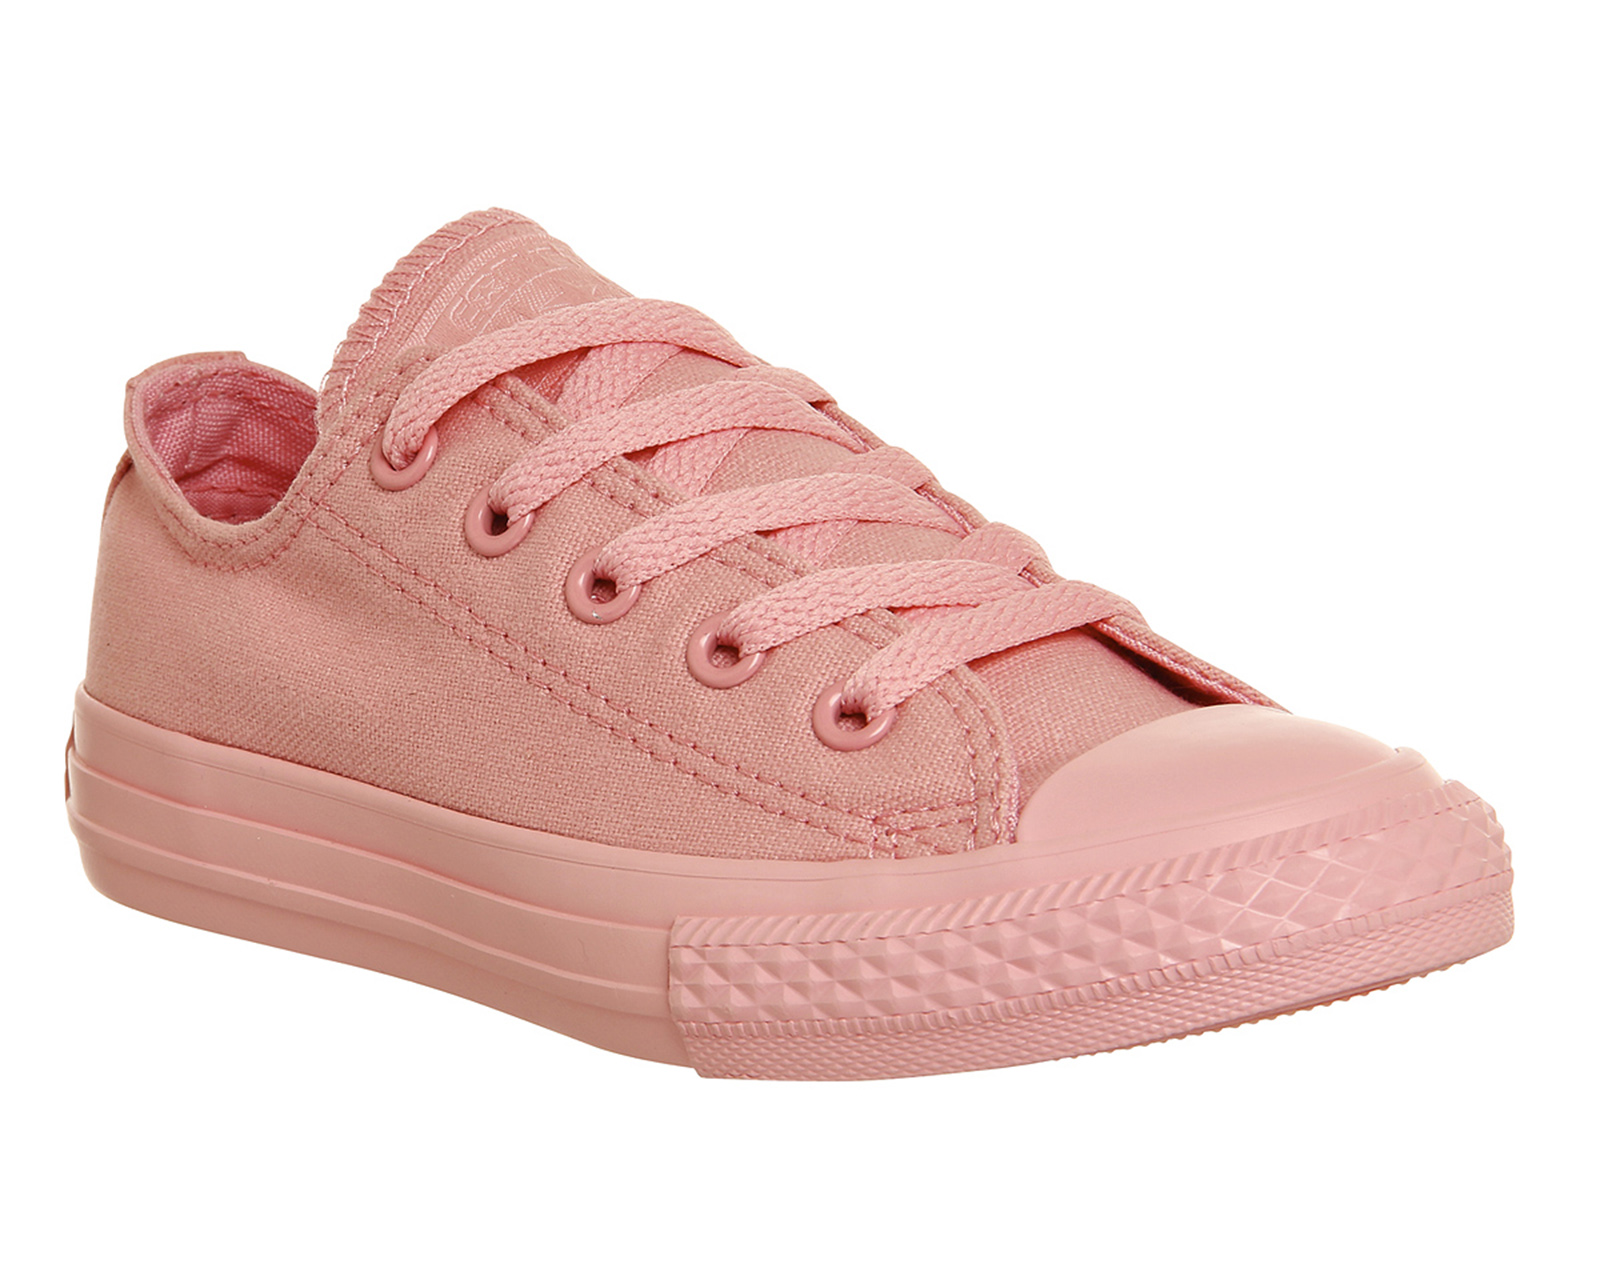 Converse All Star Low Youth Daybreak Pink Mono - Unisex